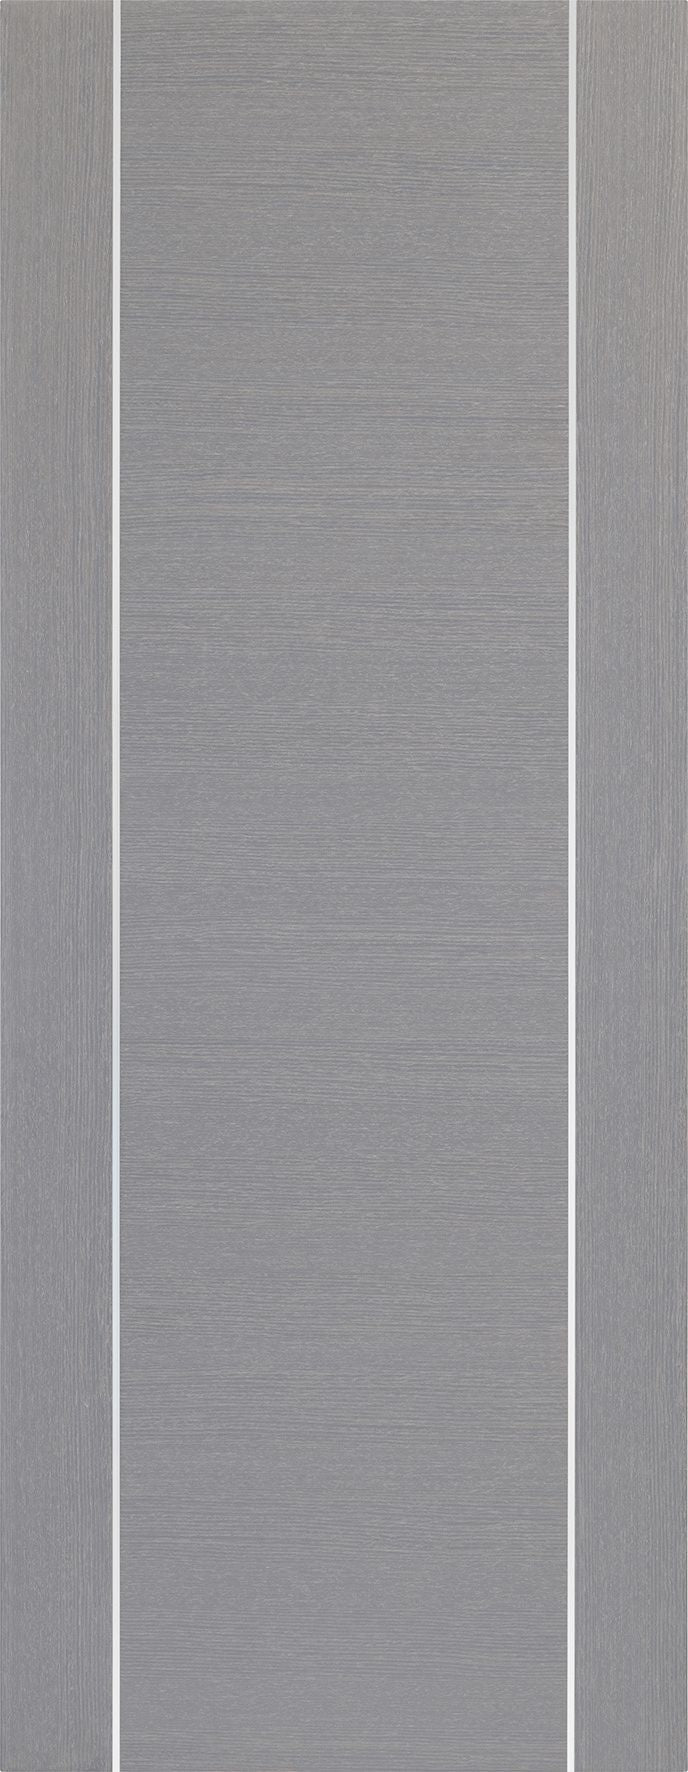 Vancouver Light Grey Prefinished Clear Glass Fire Door